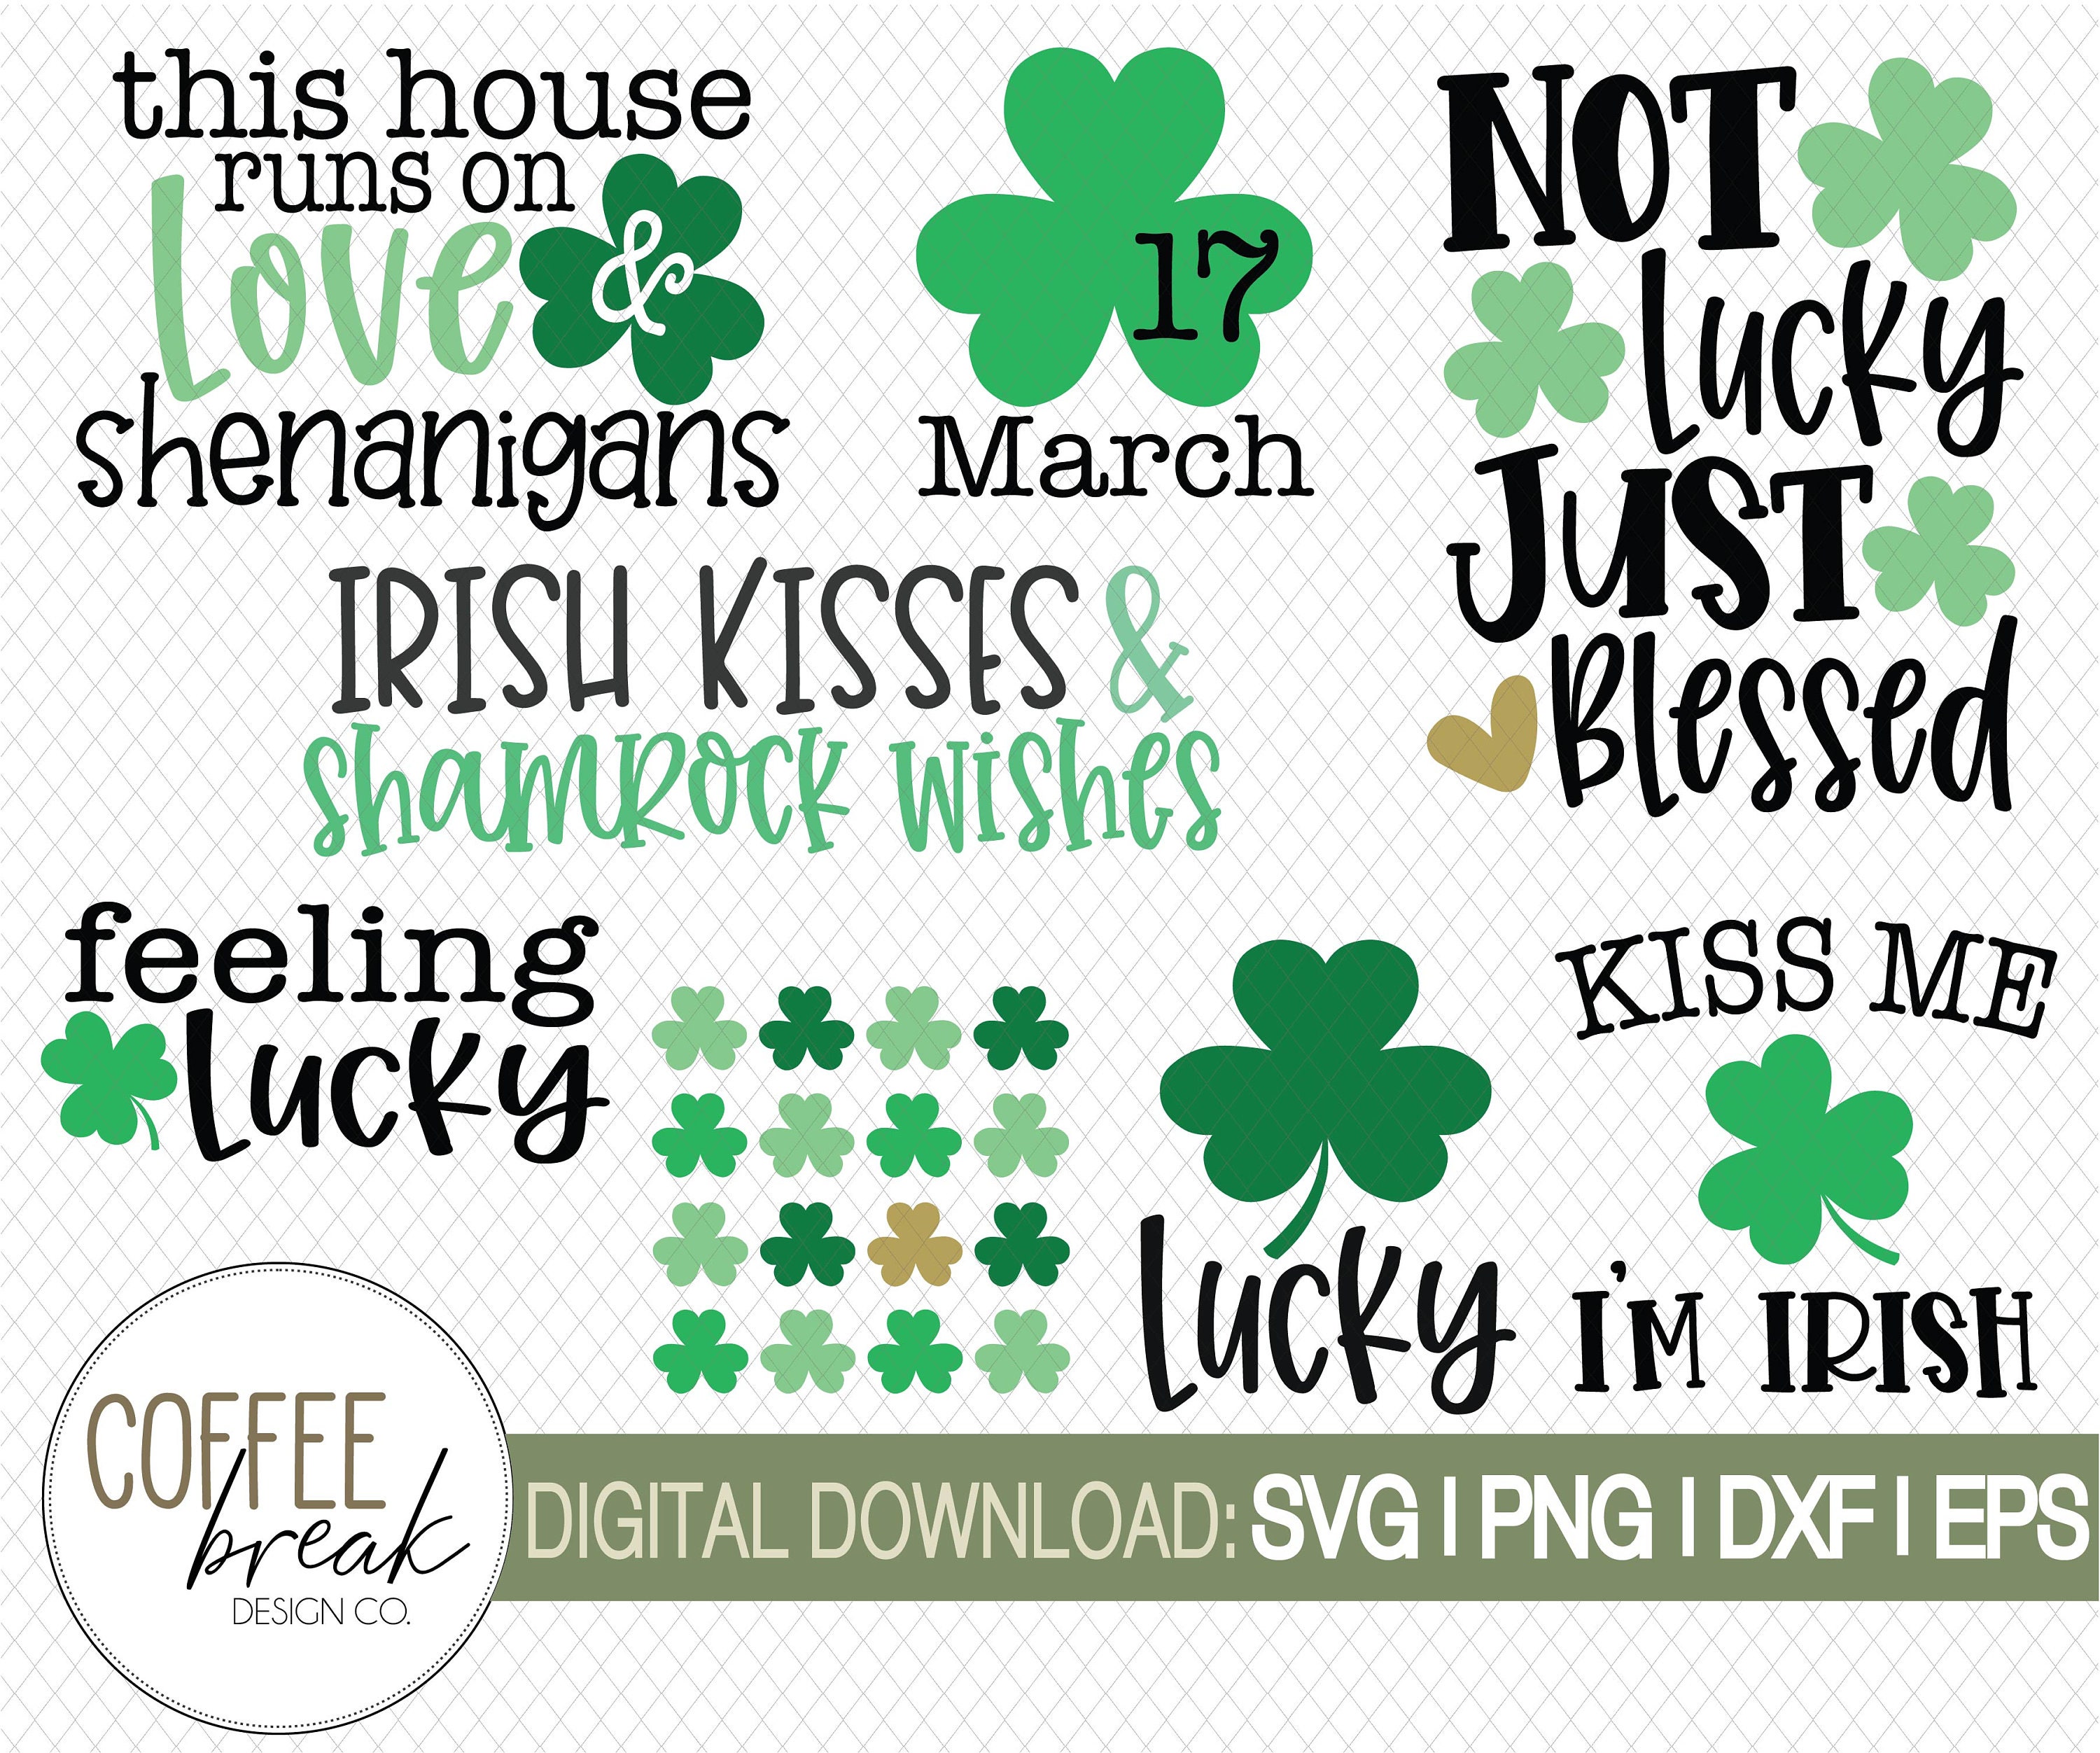 St Patrick Earrings SVG, Earring SVG Files for Silhouette and Cricut. St  Patrick's Day. St Patrick Pendant. Leather Earring, Leprechaun. 